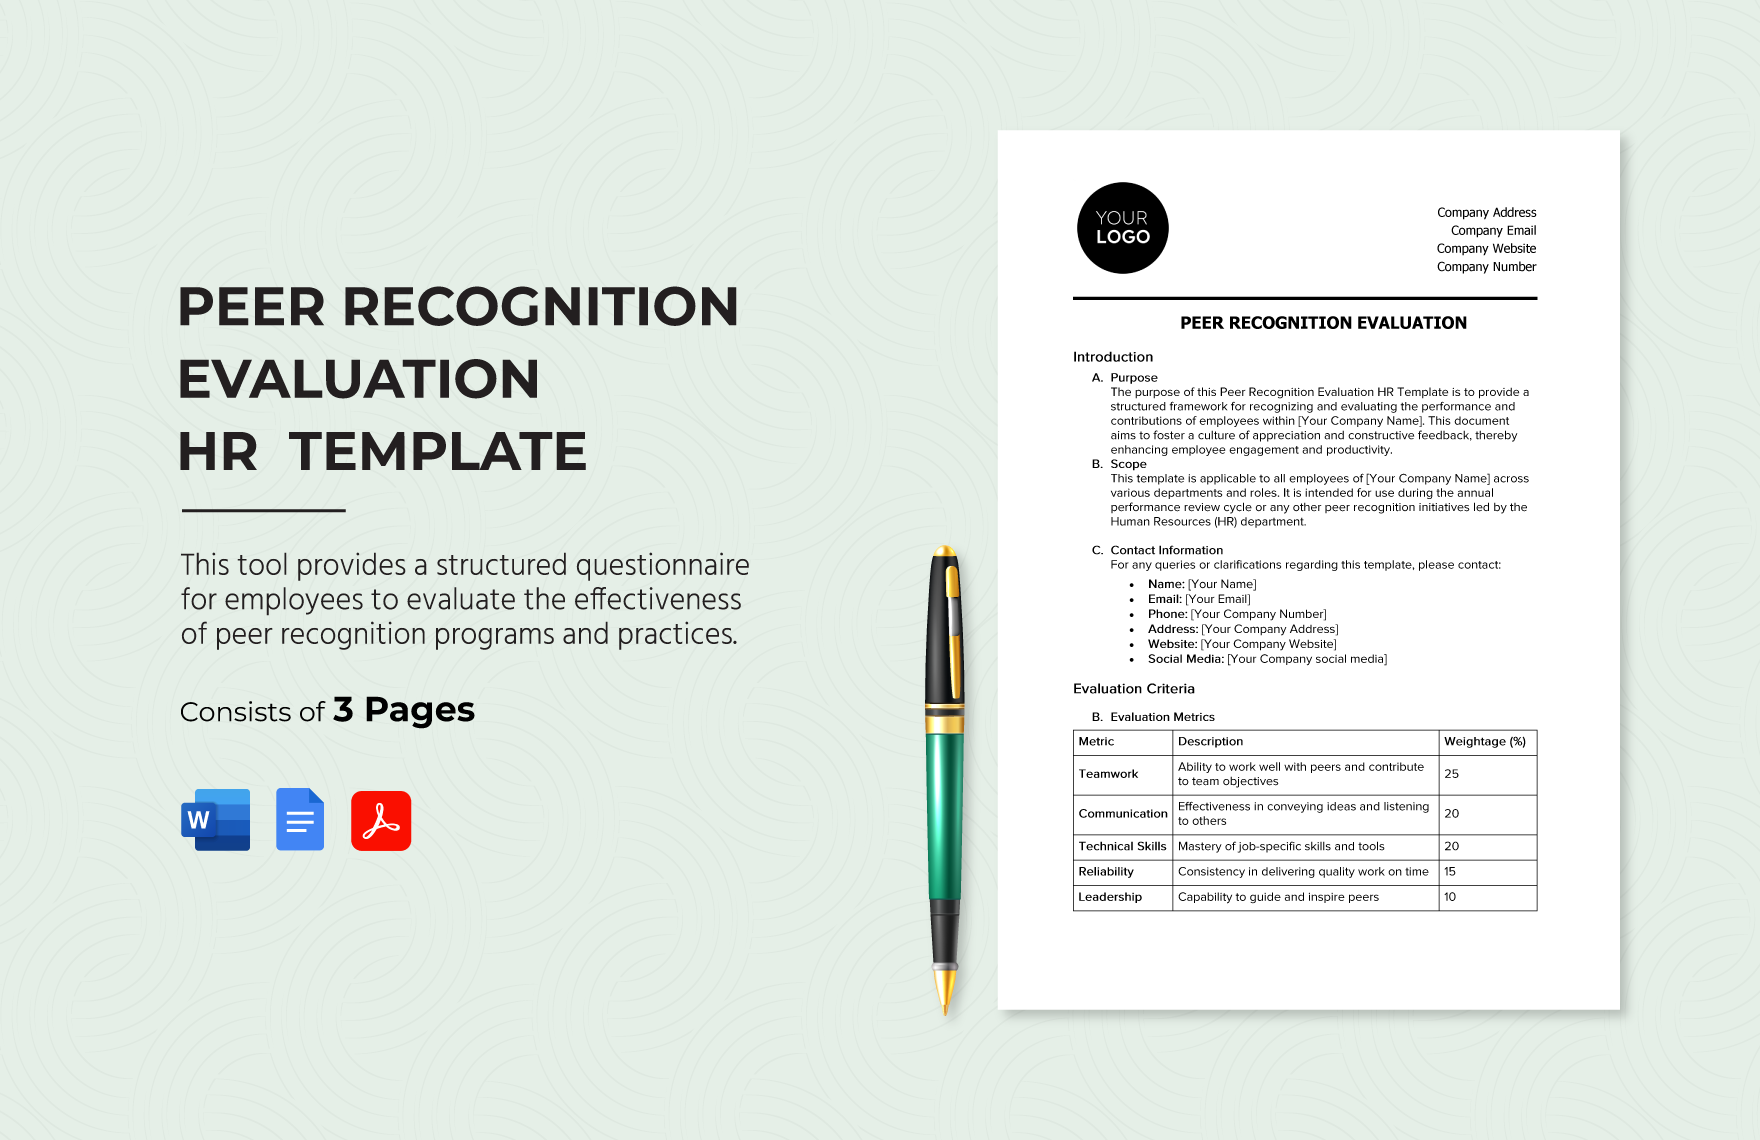 Peer Recognition Evaluation HR Template